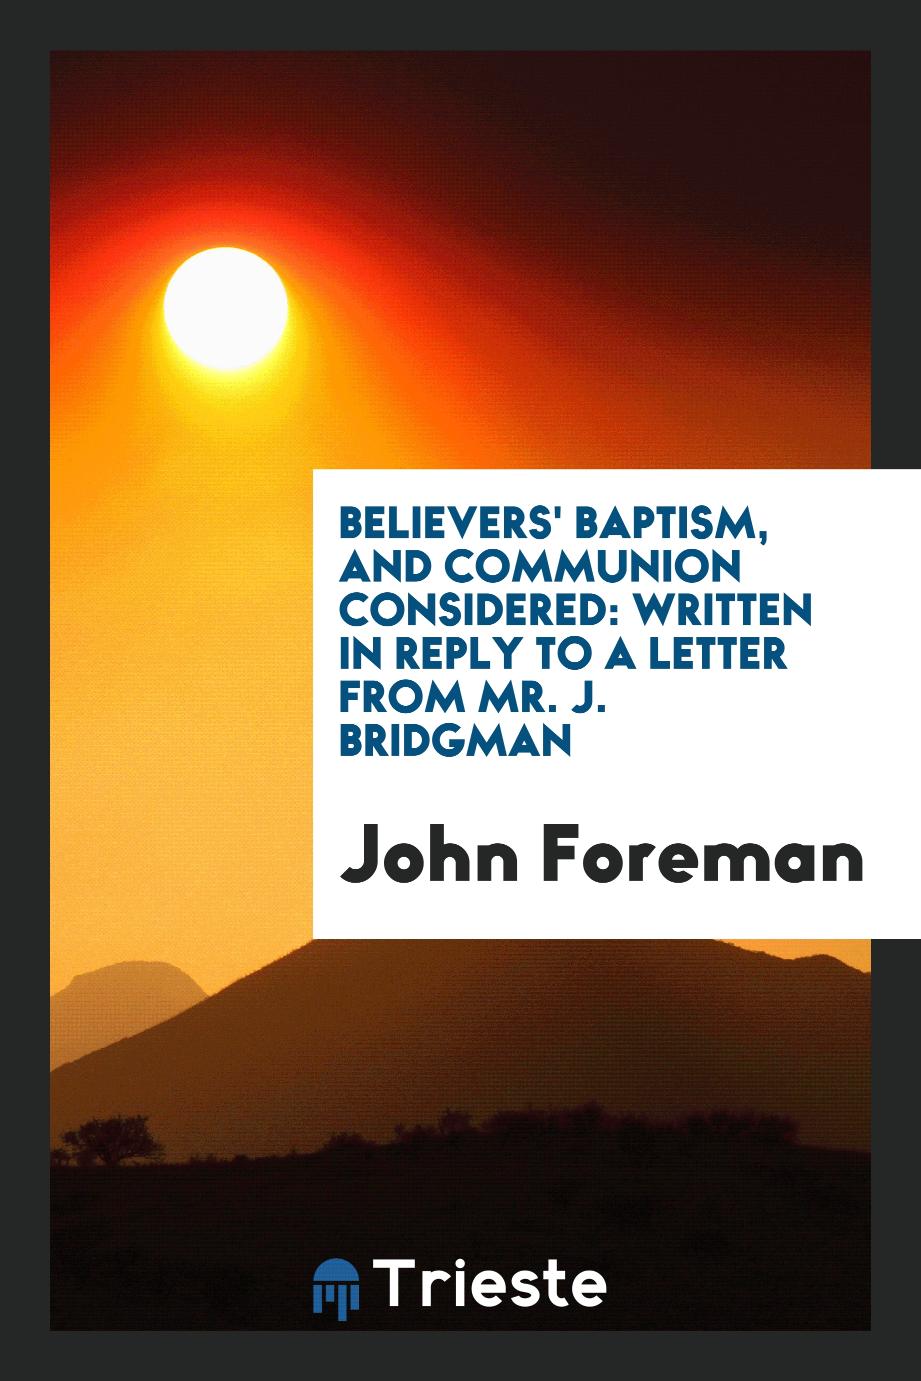 Believers' Baptism, and Communion Considered: Written in Reply to a Letter from Mr. J. Bridgman